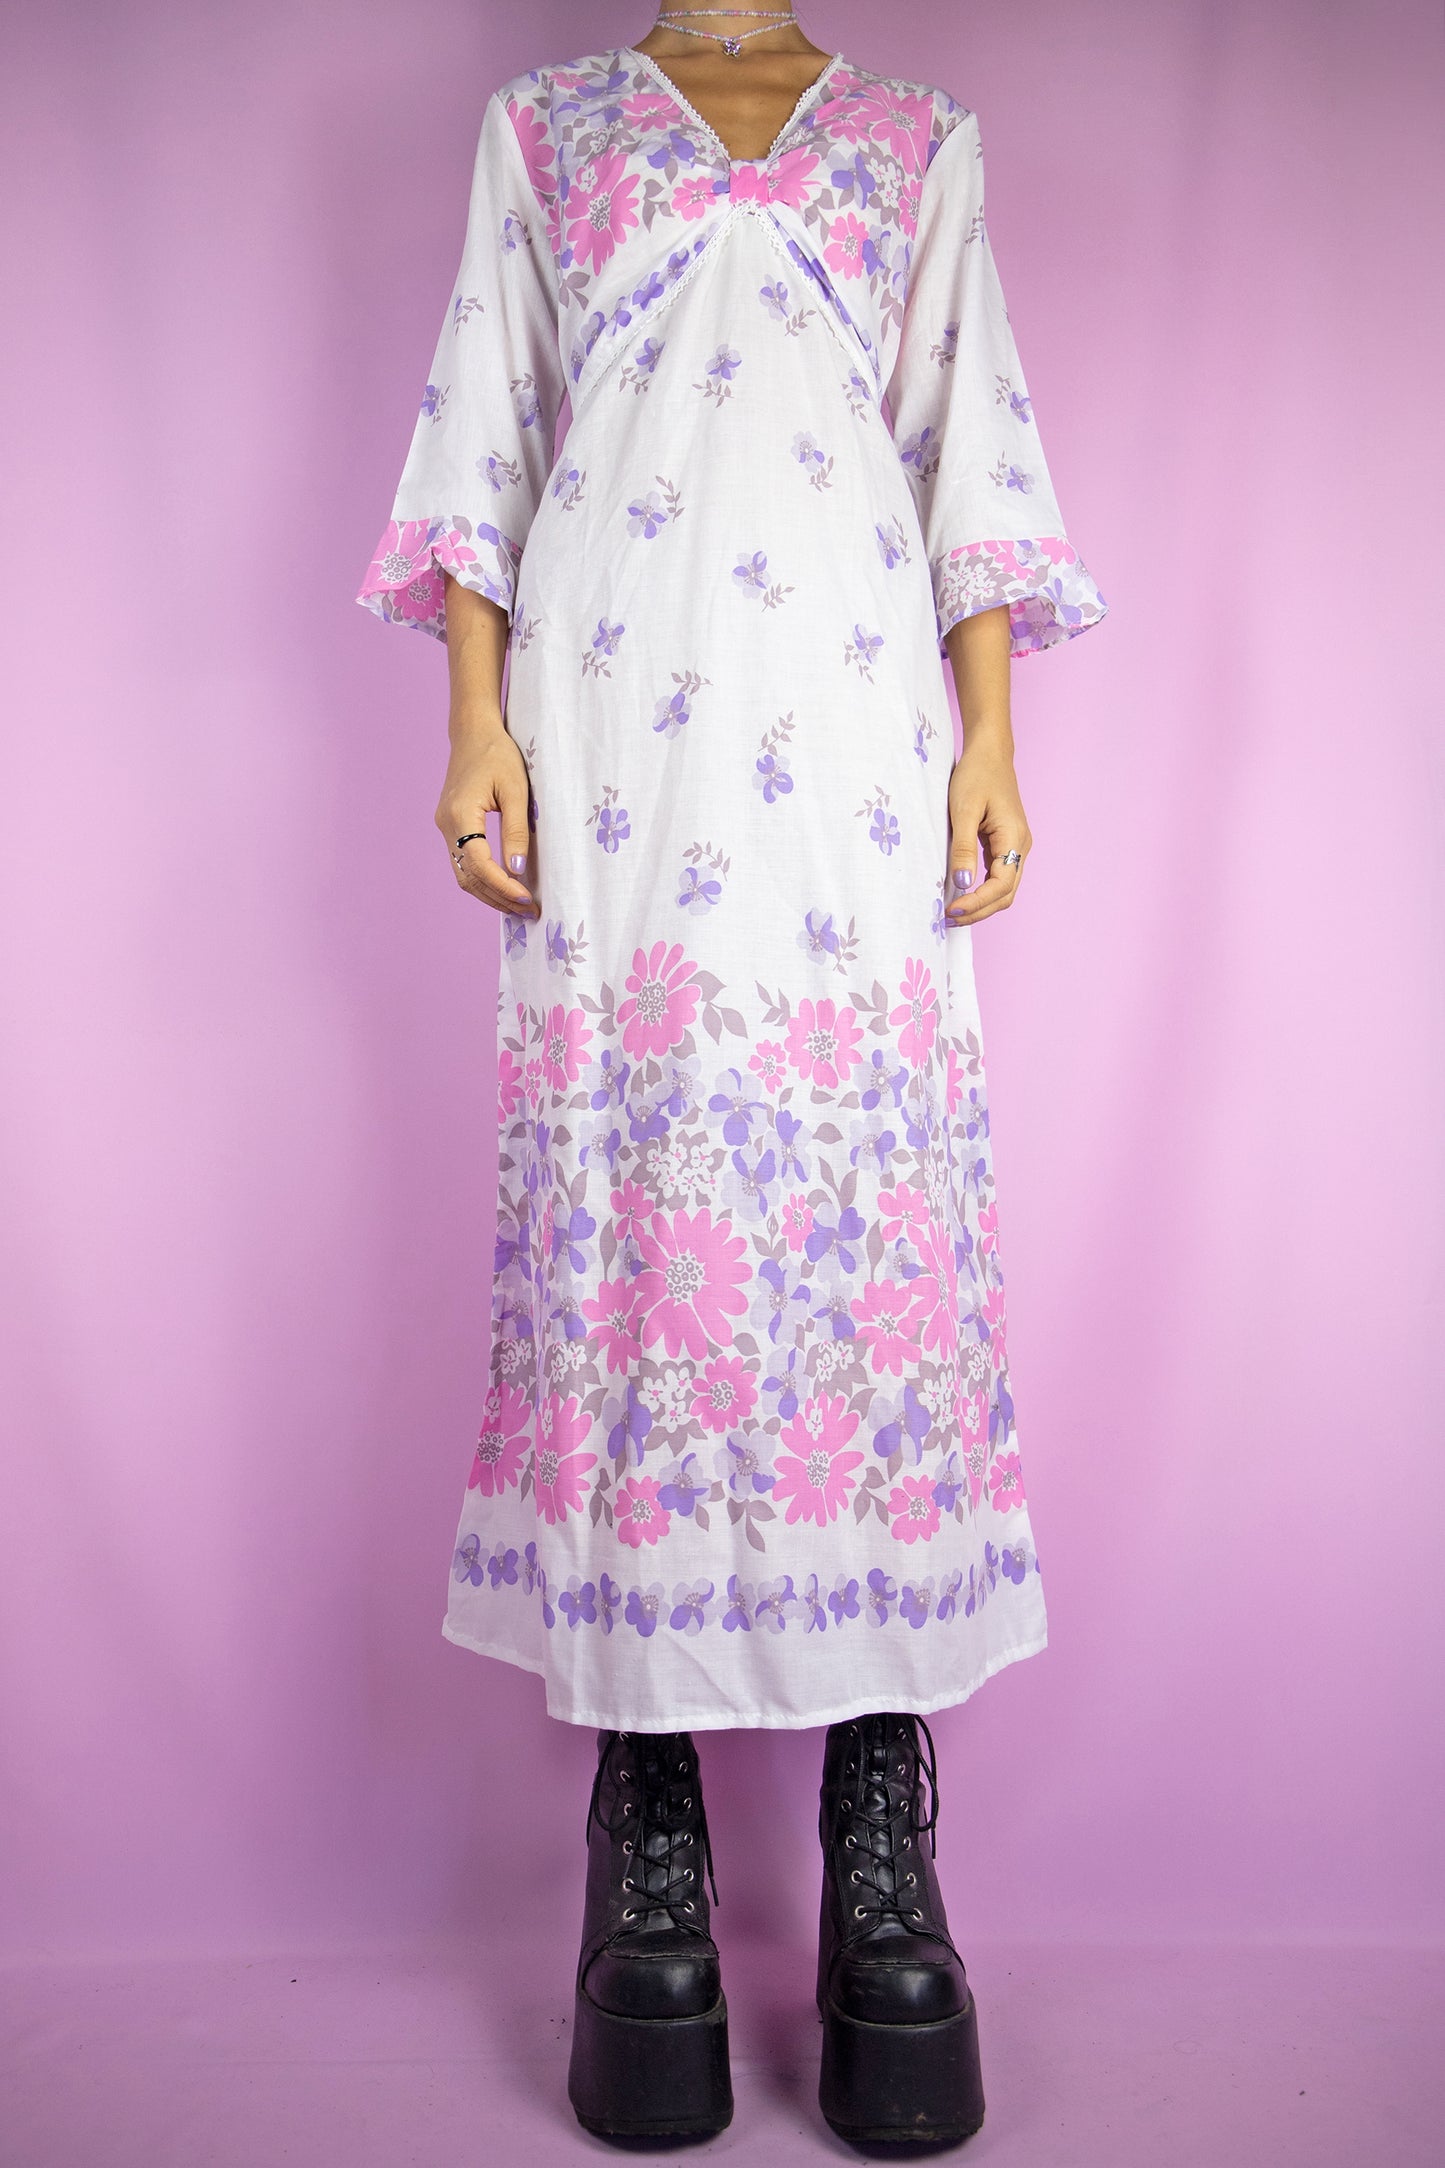 The Vintage 80s Boho White Midi Dress is a summer bell sleeve kaftan maxi dress with a pink and purple floral pattern and a v-neck.